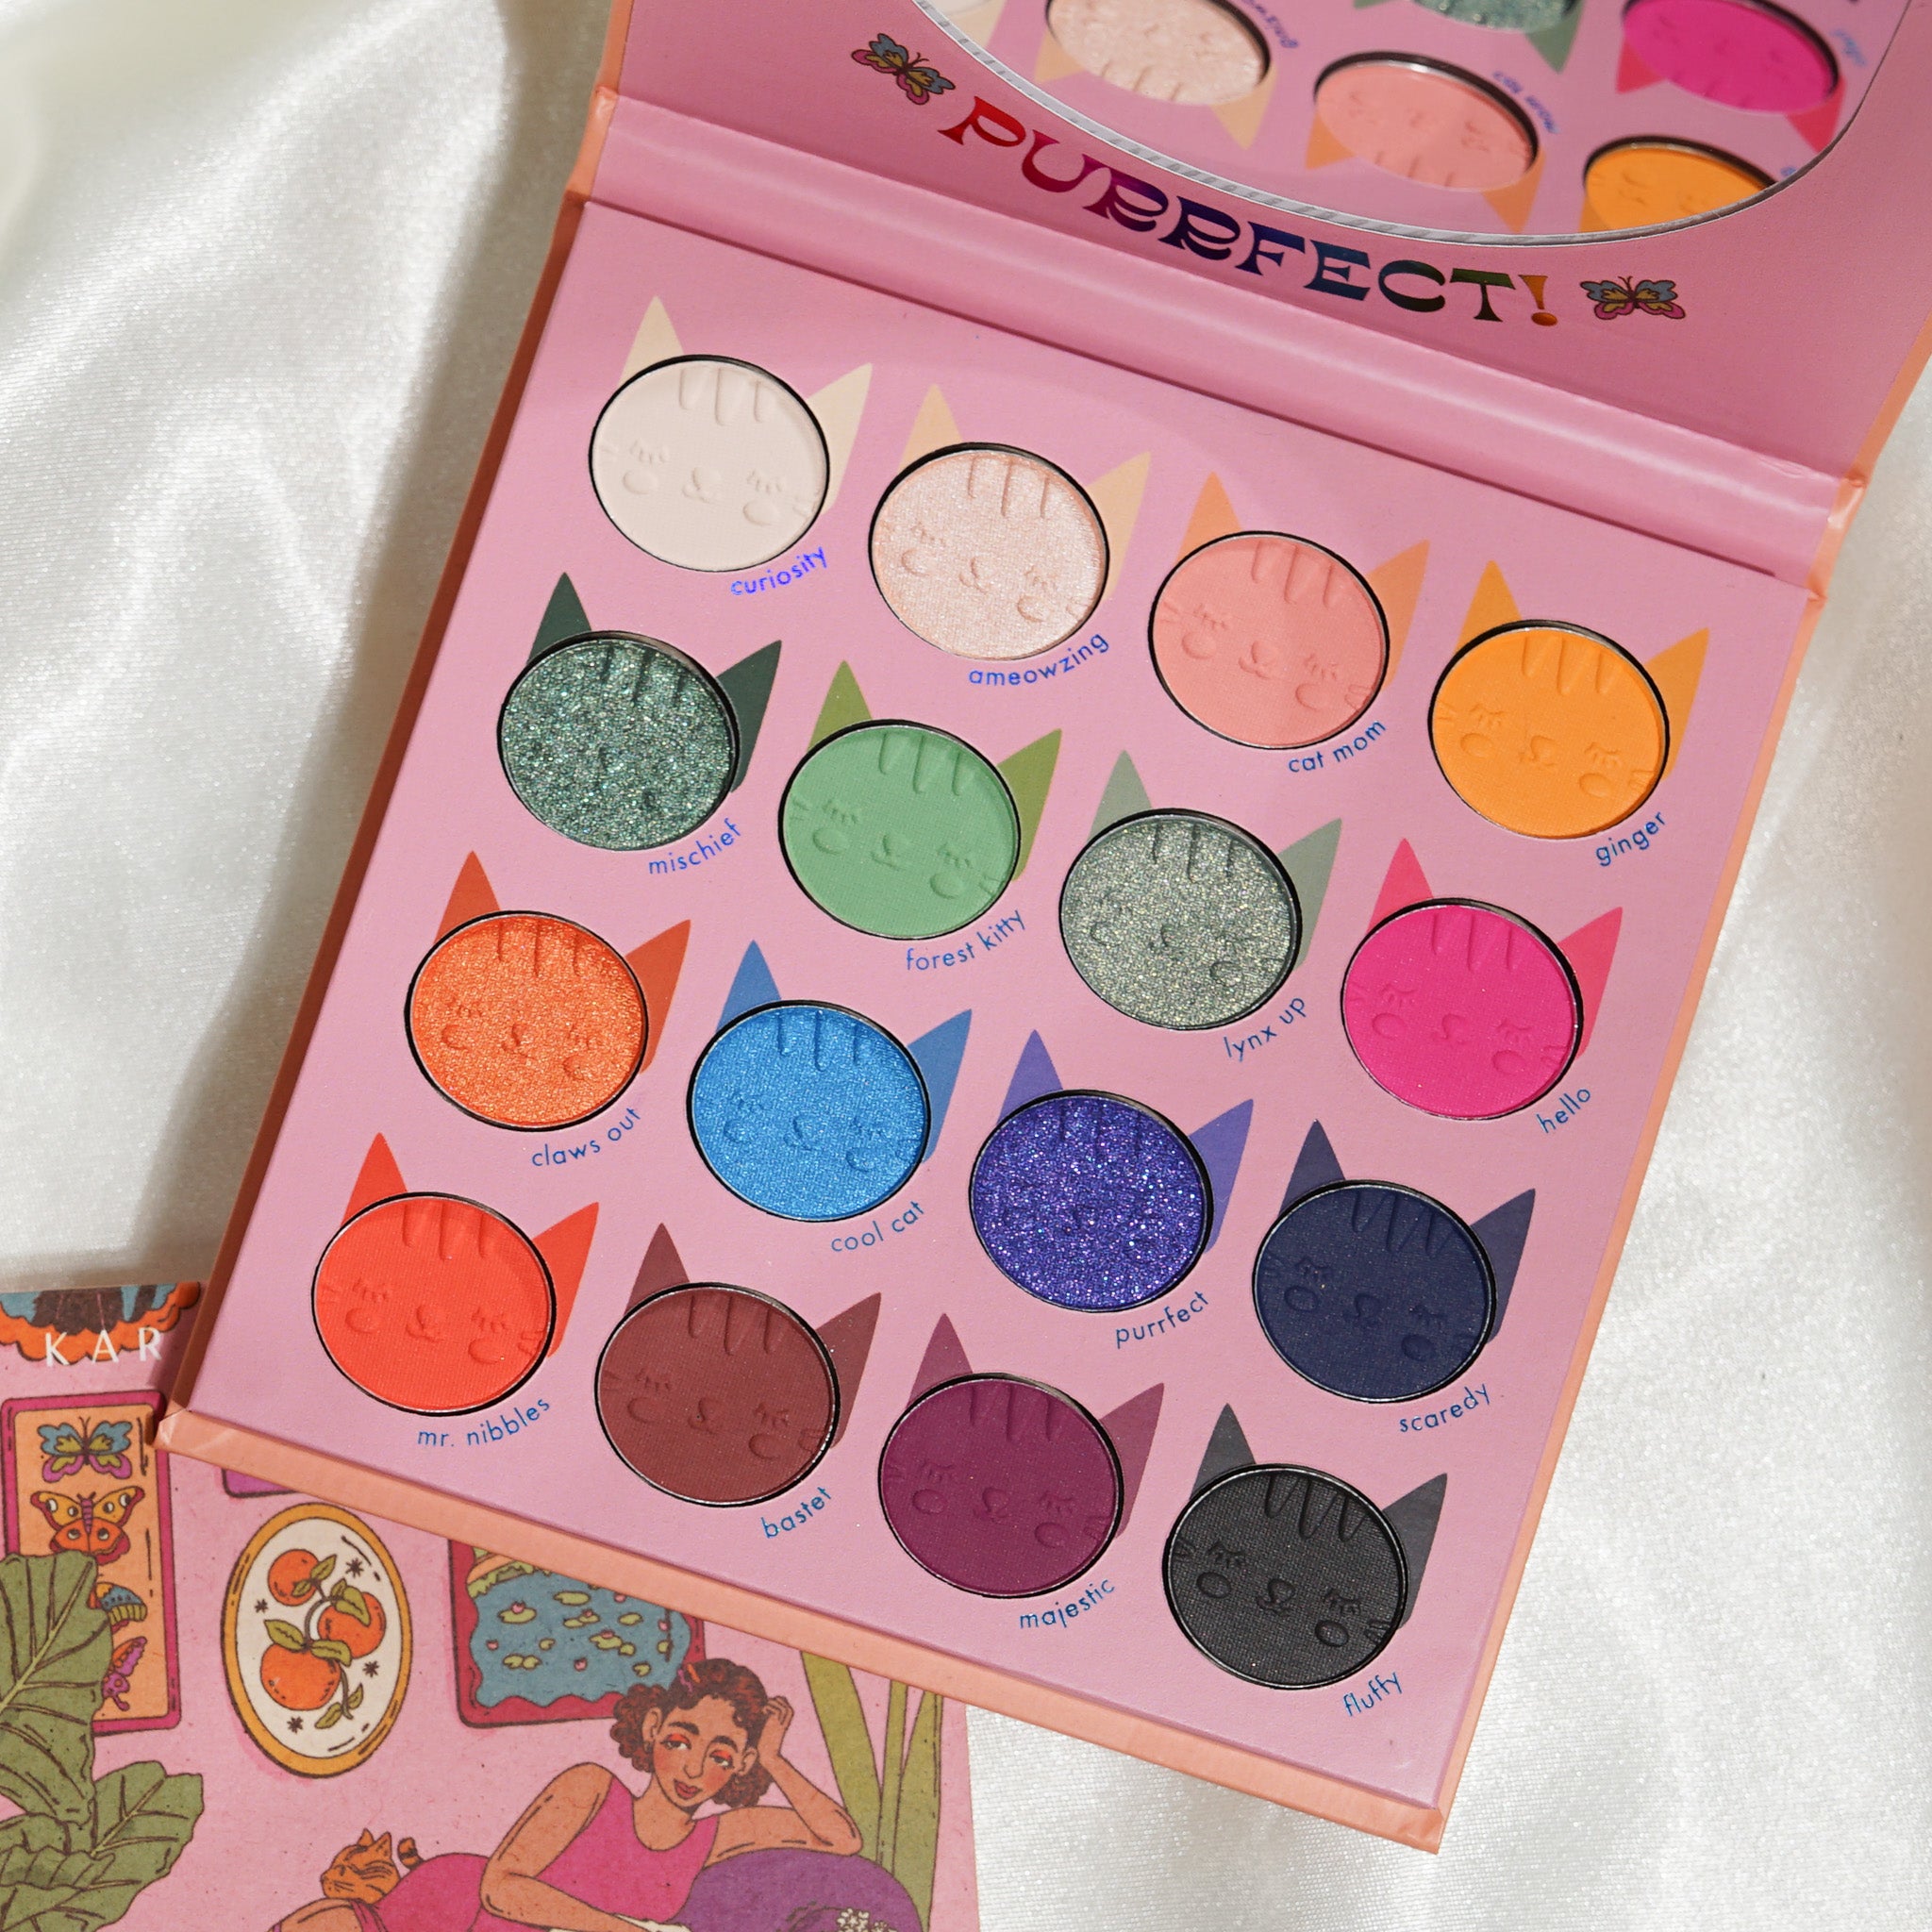  A Moment With You Palette : Beauty & Personal Care